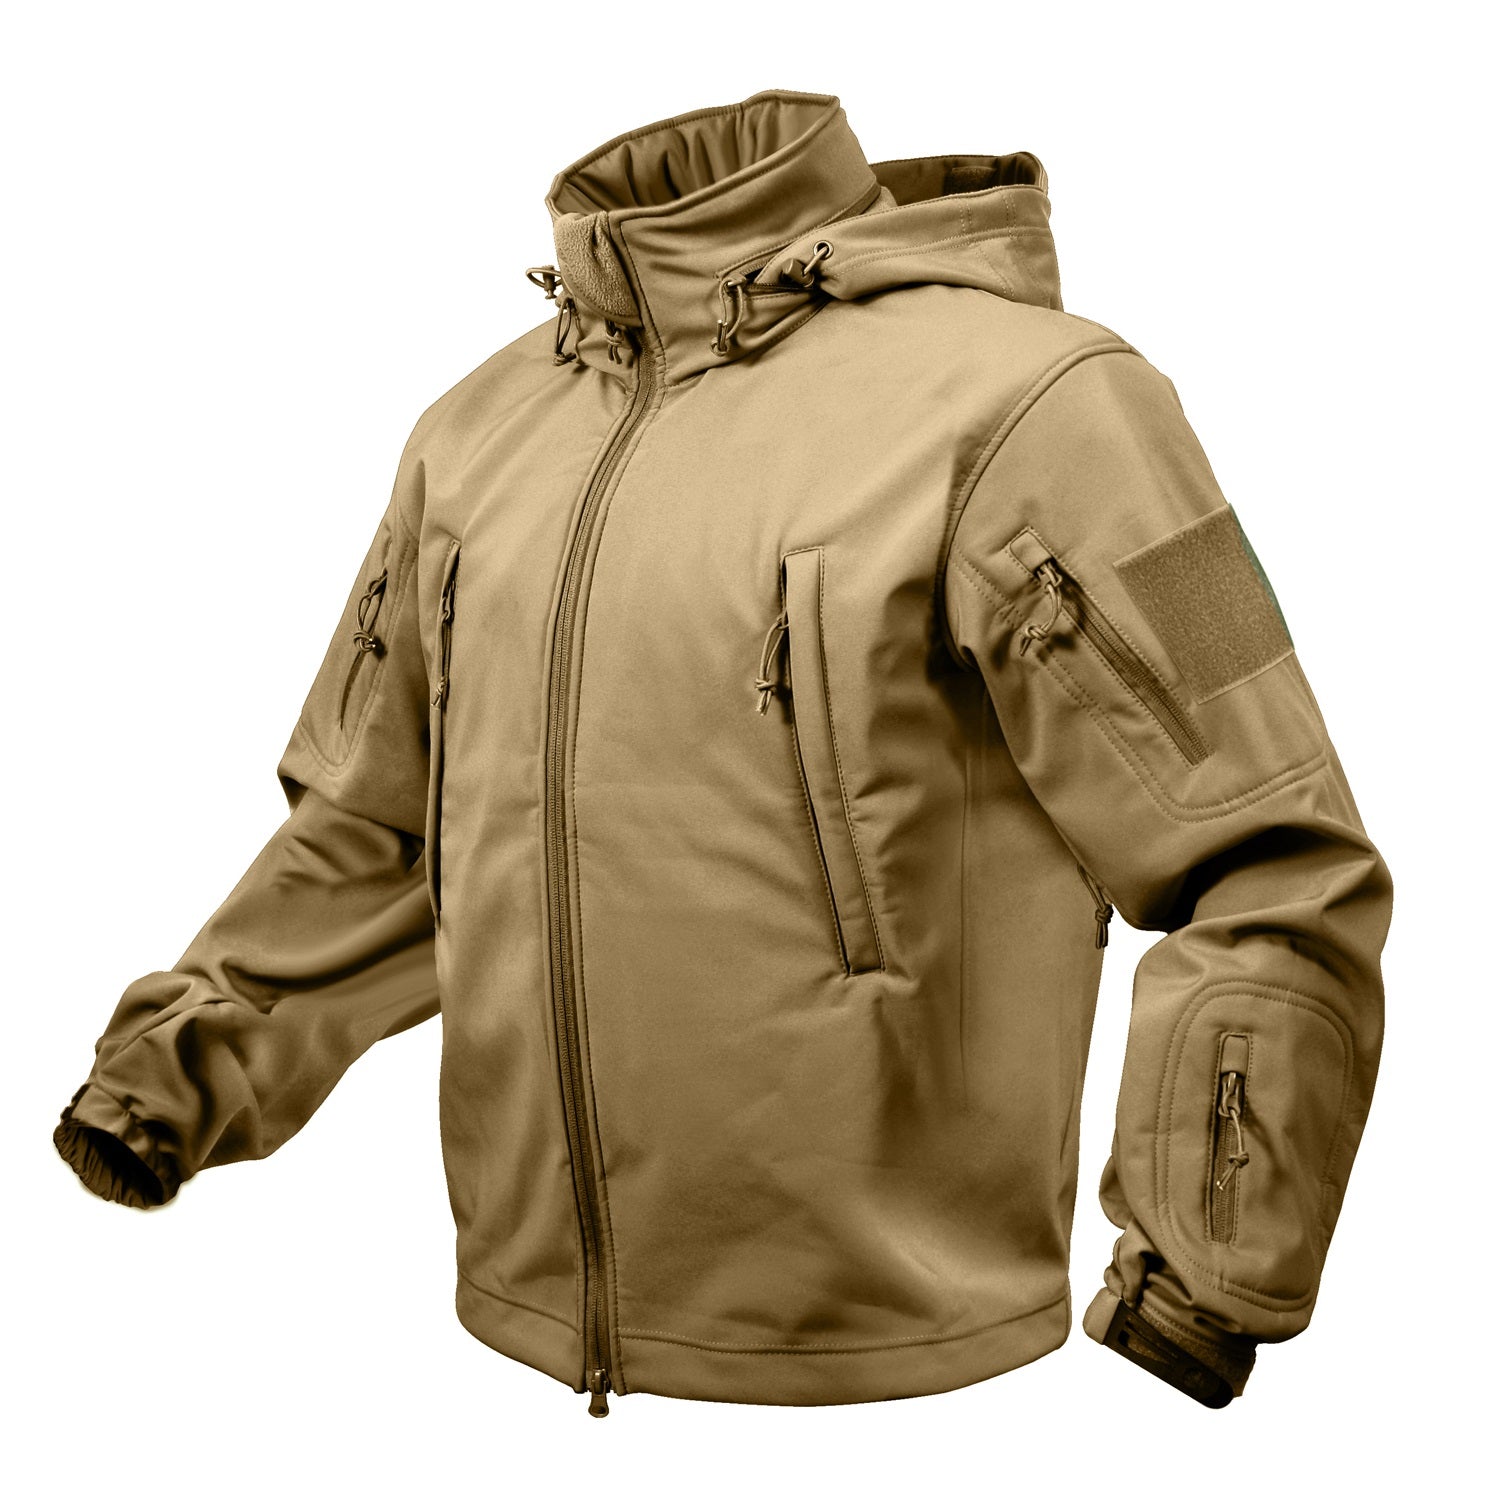 Rothco Special Ops Tactical Soft Shell Jacket Coyote